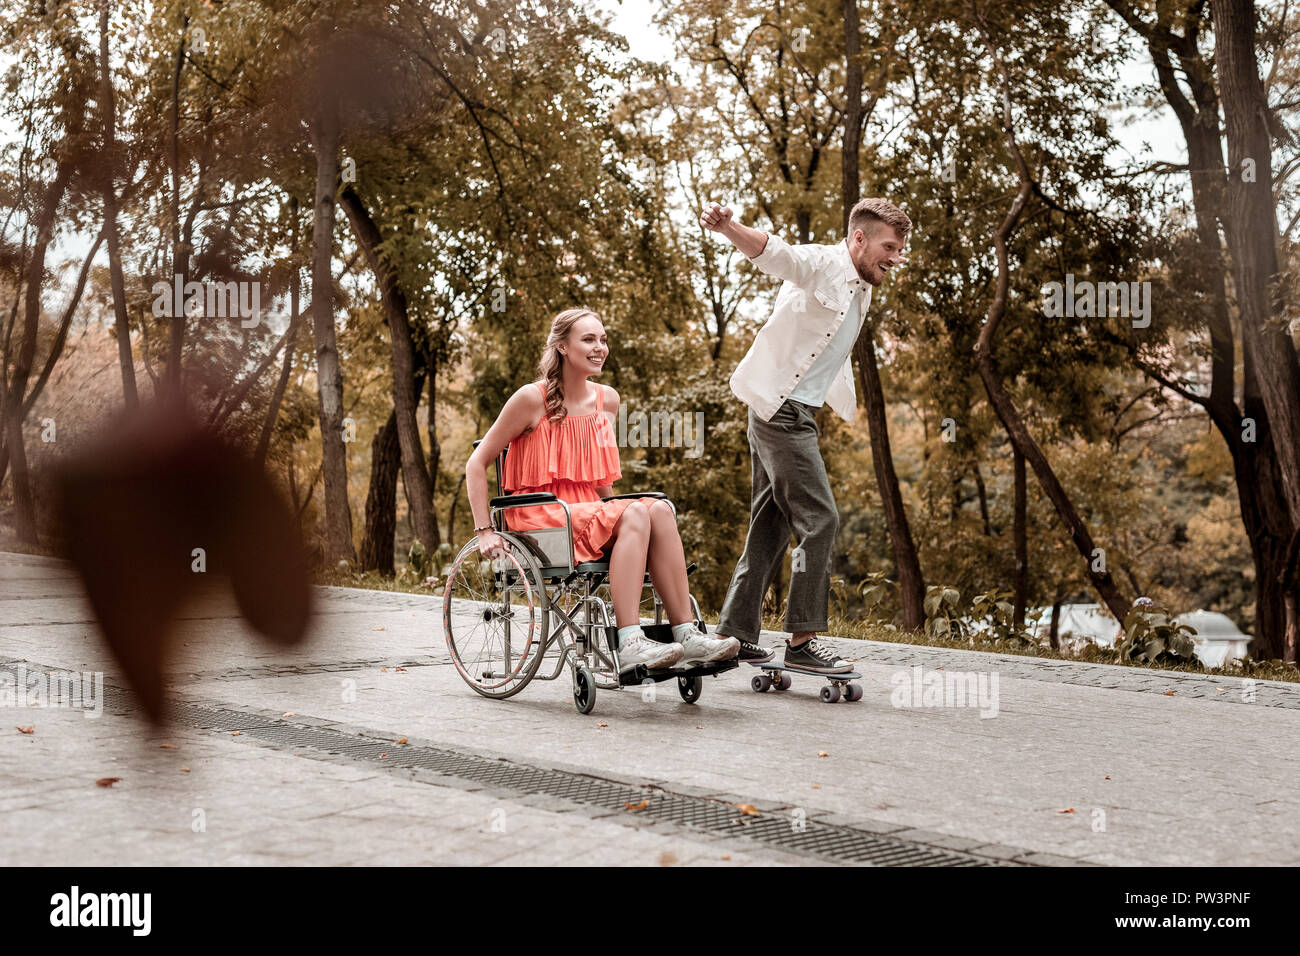 Happy man enjoying the speed of skateboard and his girlfriend smiling Stock Photo